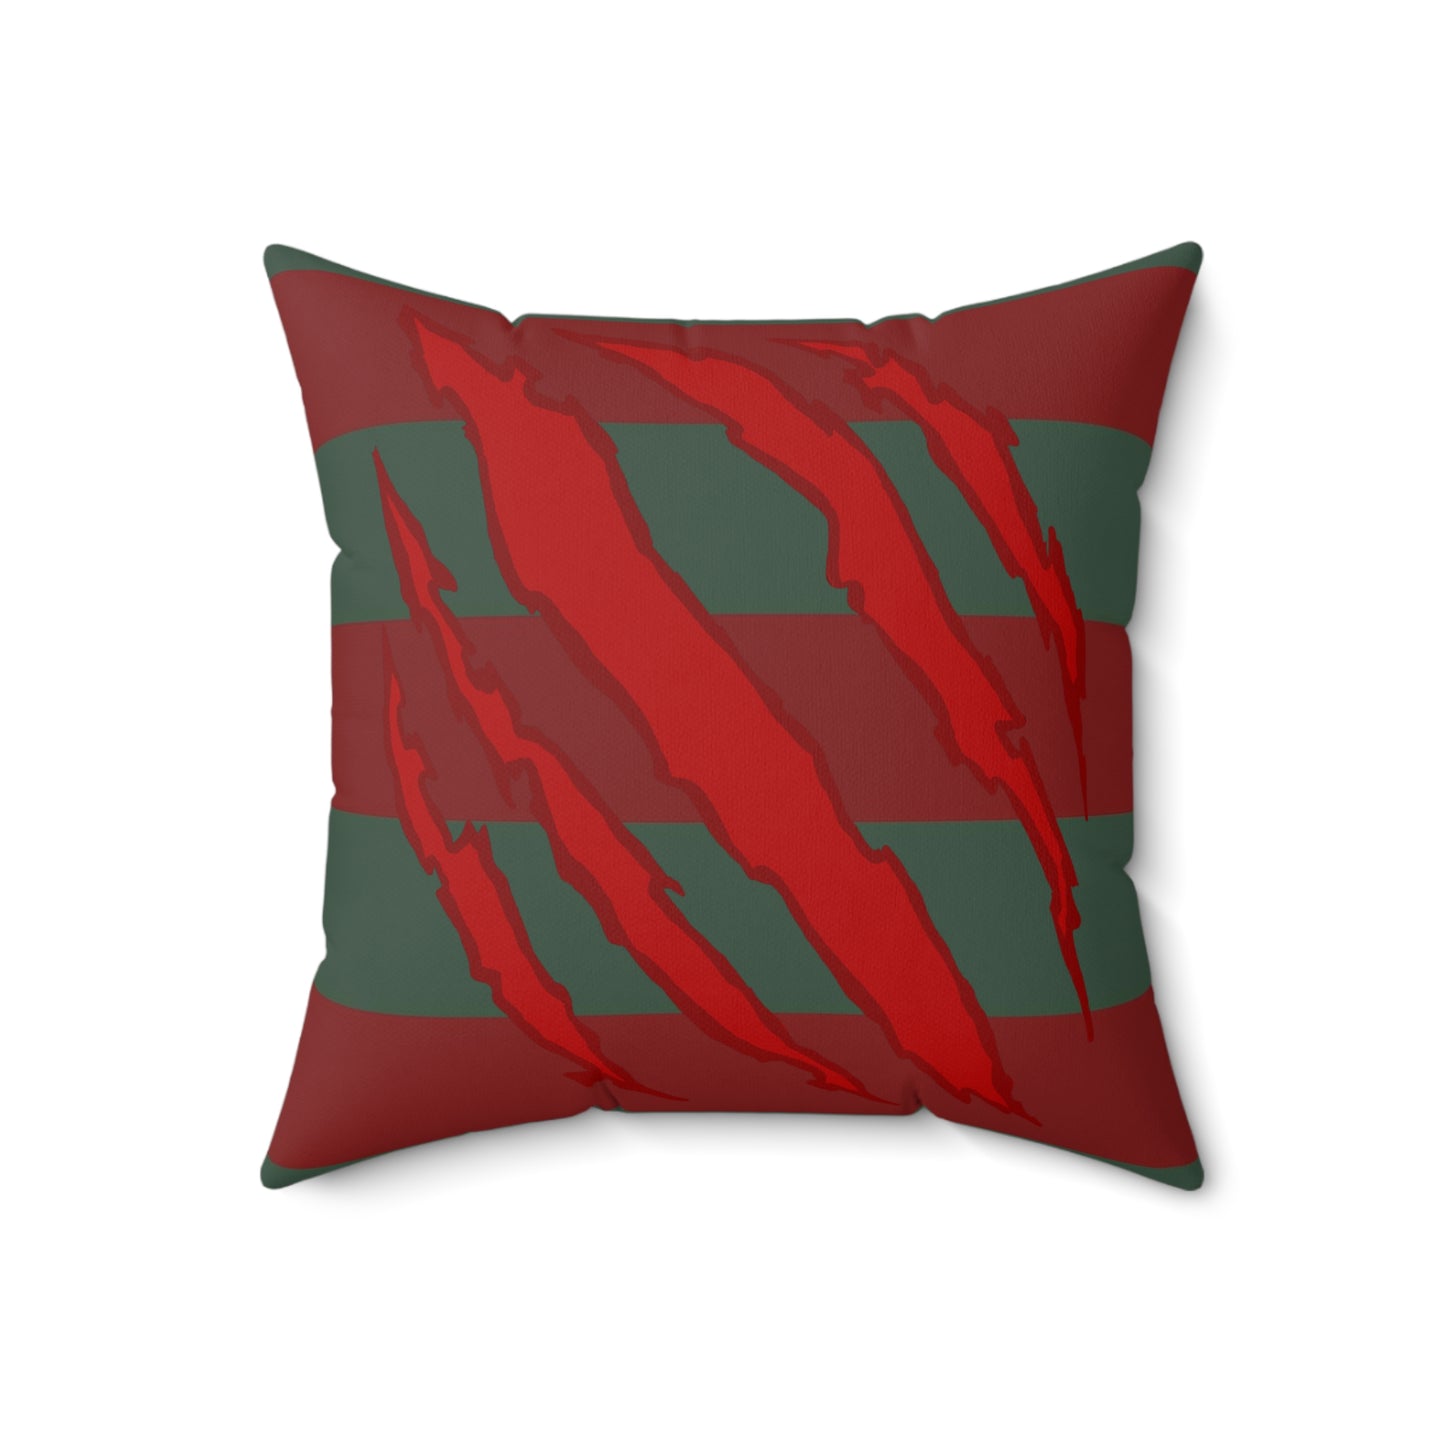 Freddy’s Sweater Throw Pillow